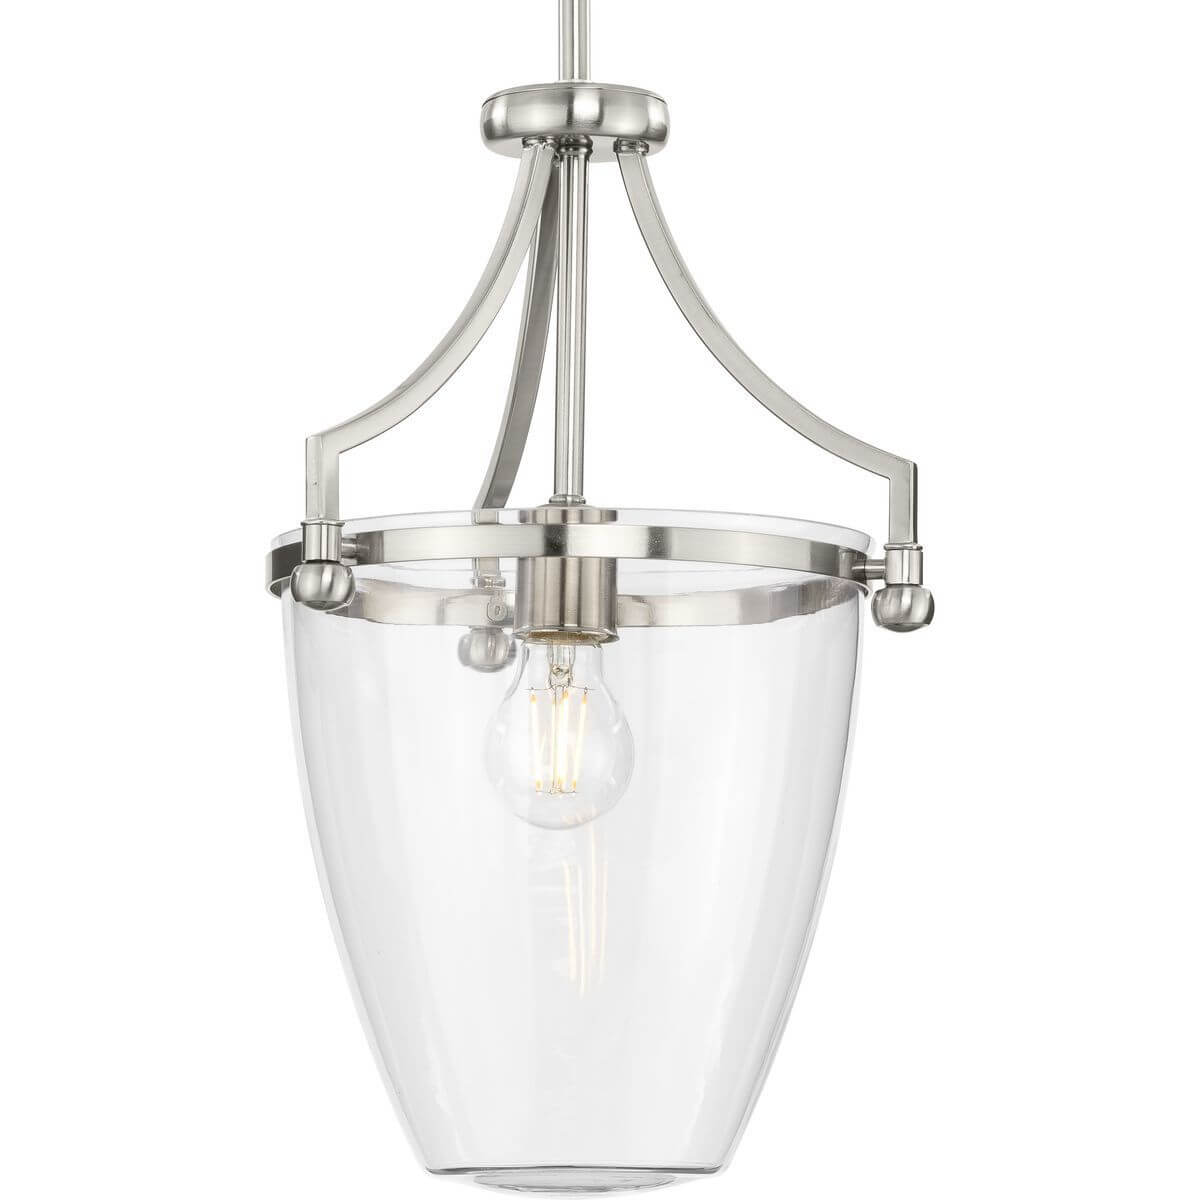 Progress Lighting P500360-009 Parkhurst 1 Light 12 inch Mini Pendant in Brushed Nickel with Clear Glass